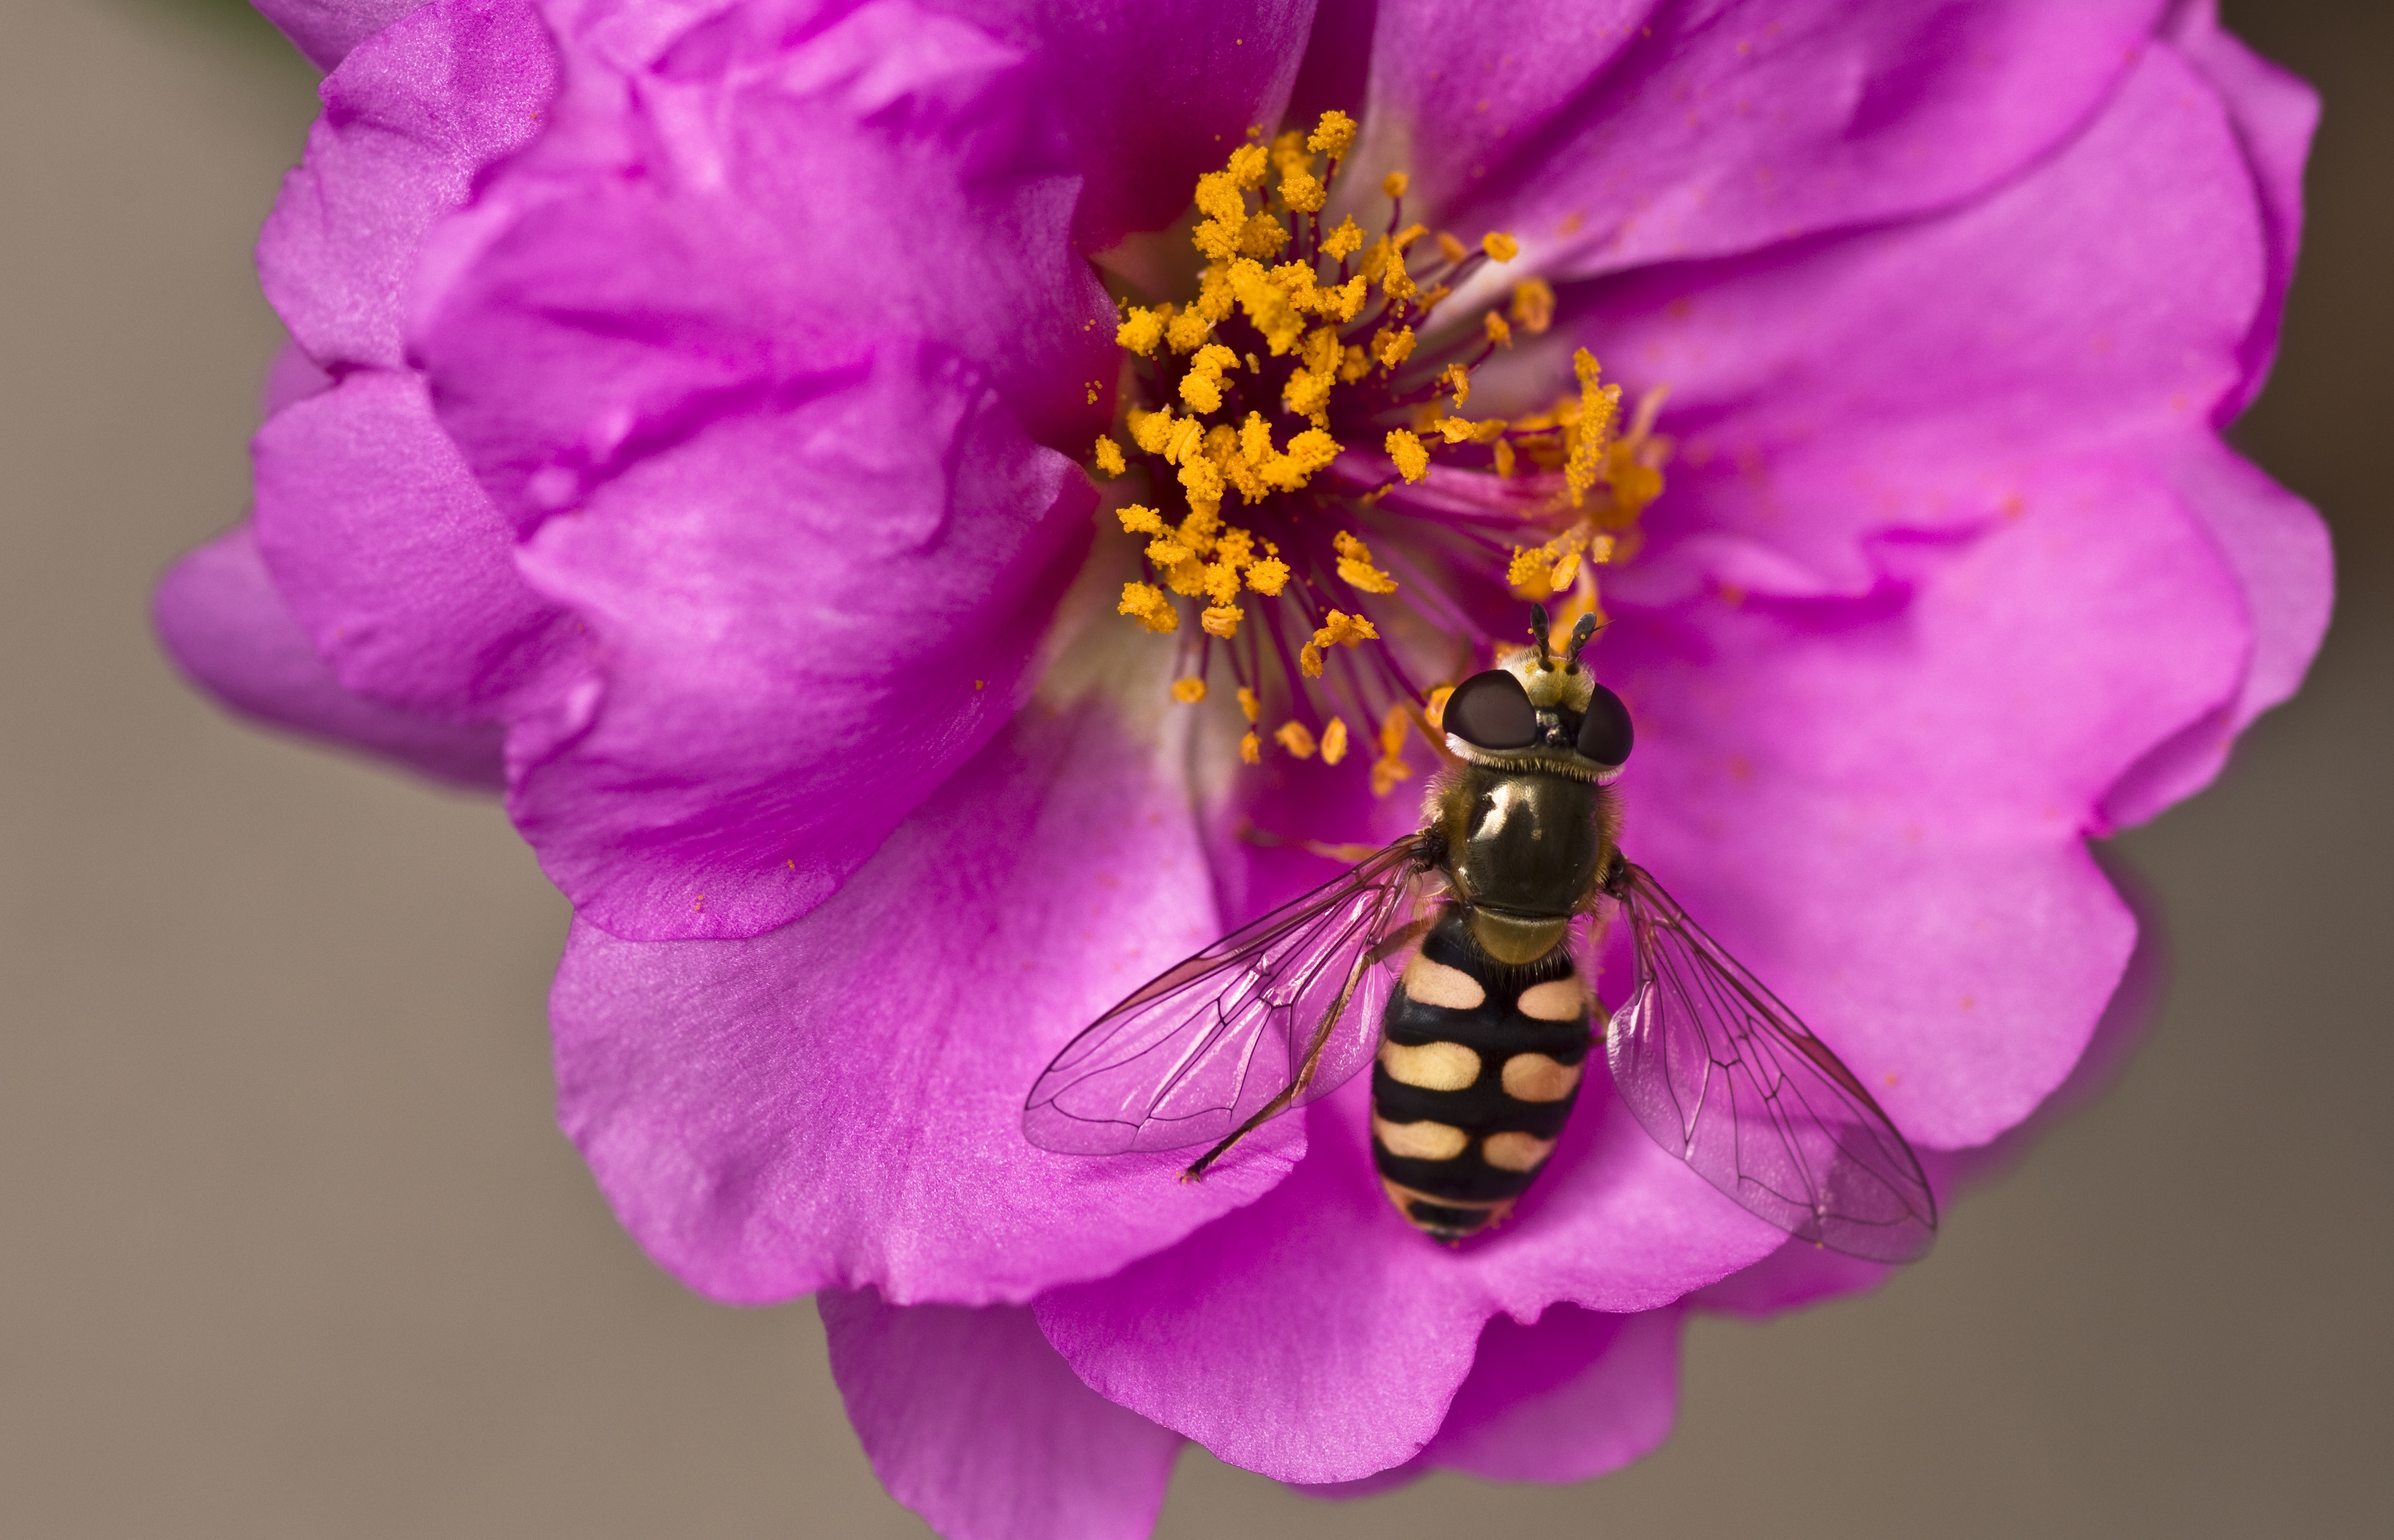 Hoverfly Insect Flower Pink Flower Close Up Syrphid Flies Fly 4846x3118